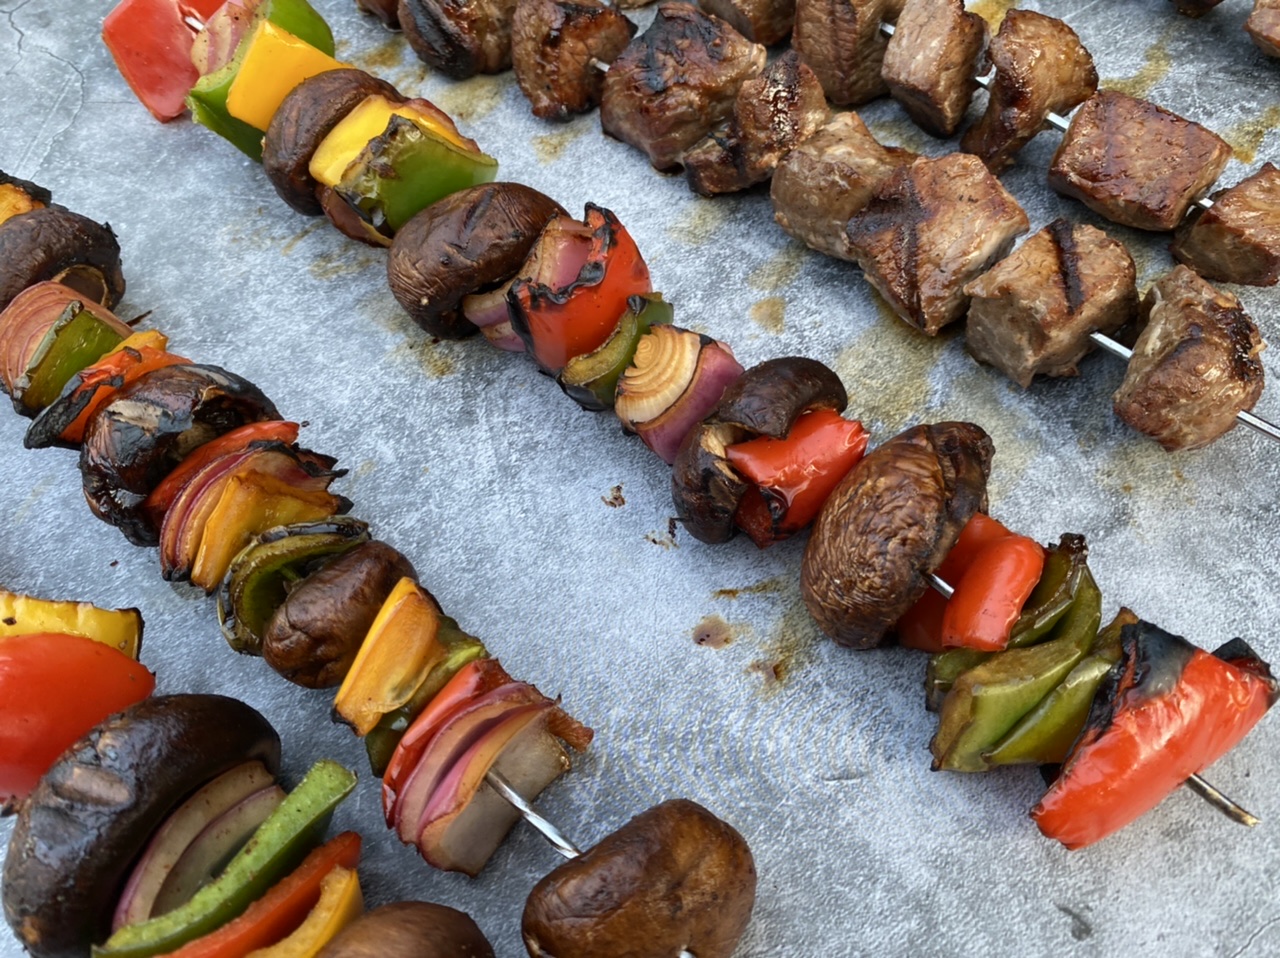 98A47756 705E 434D A848 1DD65BB965BF - Amazing Vitamin Packed Steakhouse Shish Kebabs with Charred Vegetables